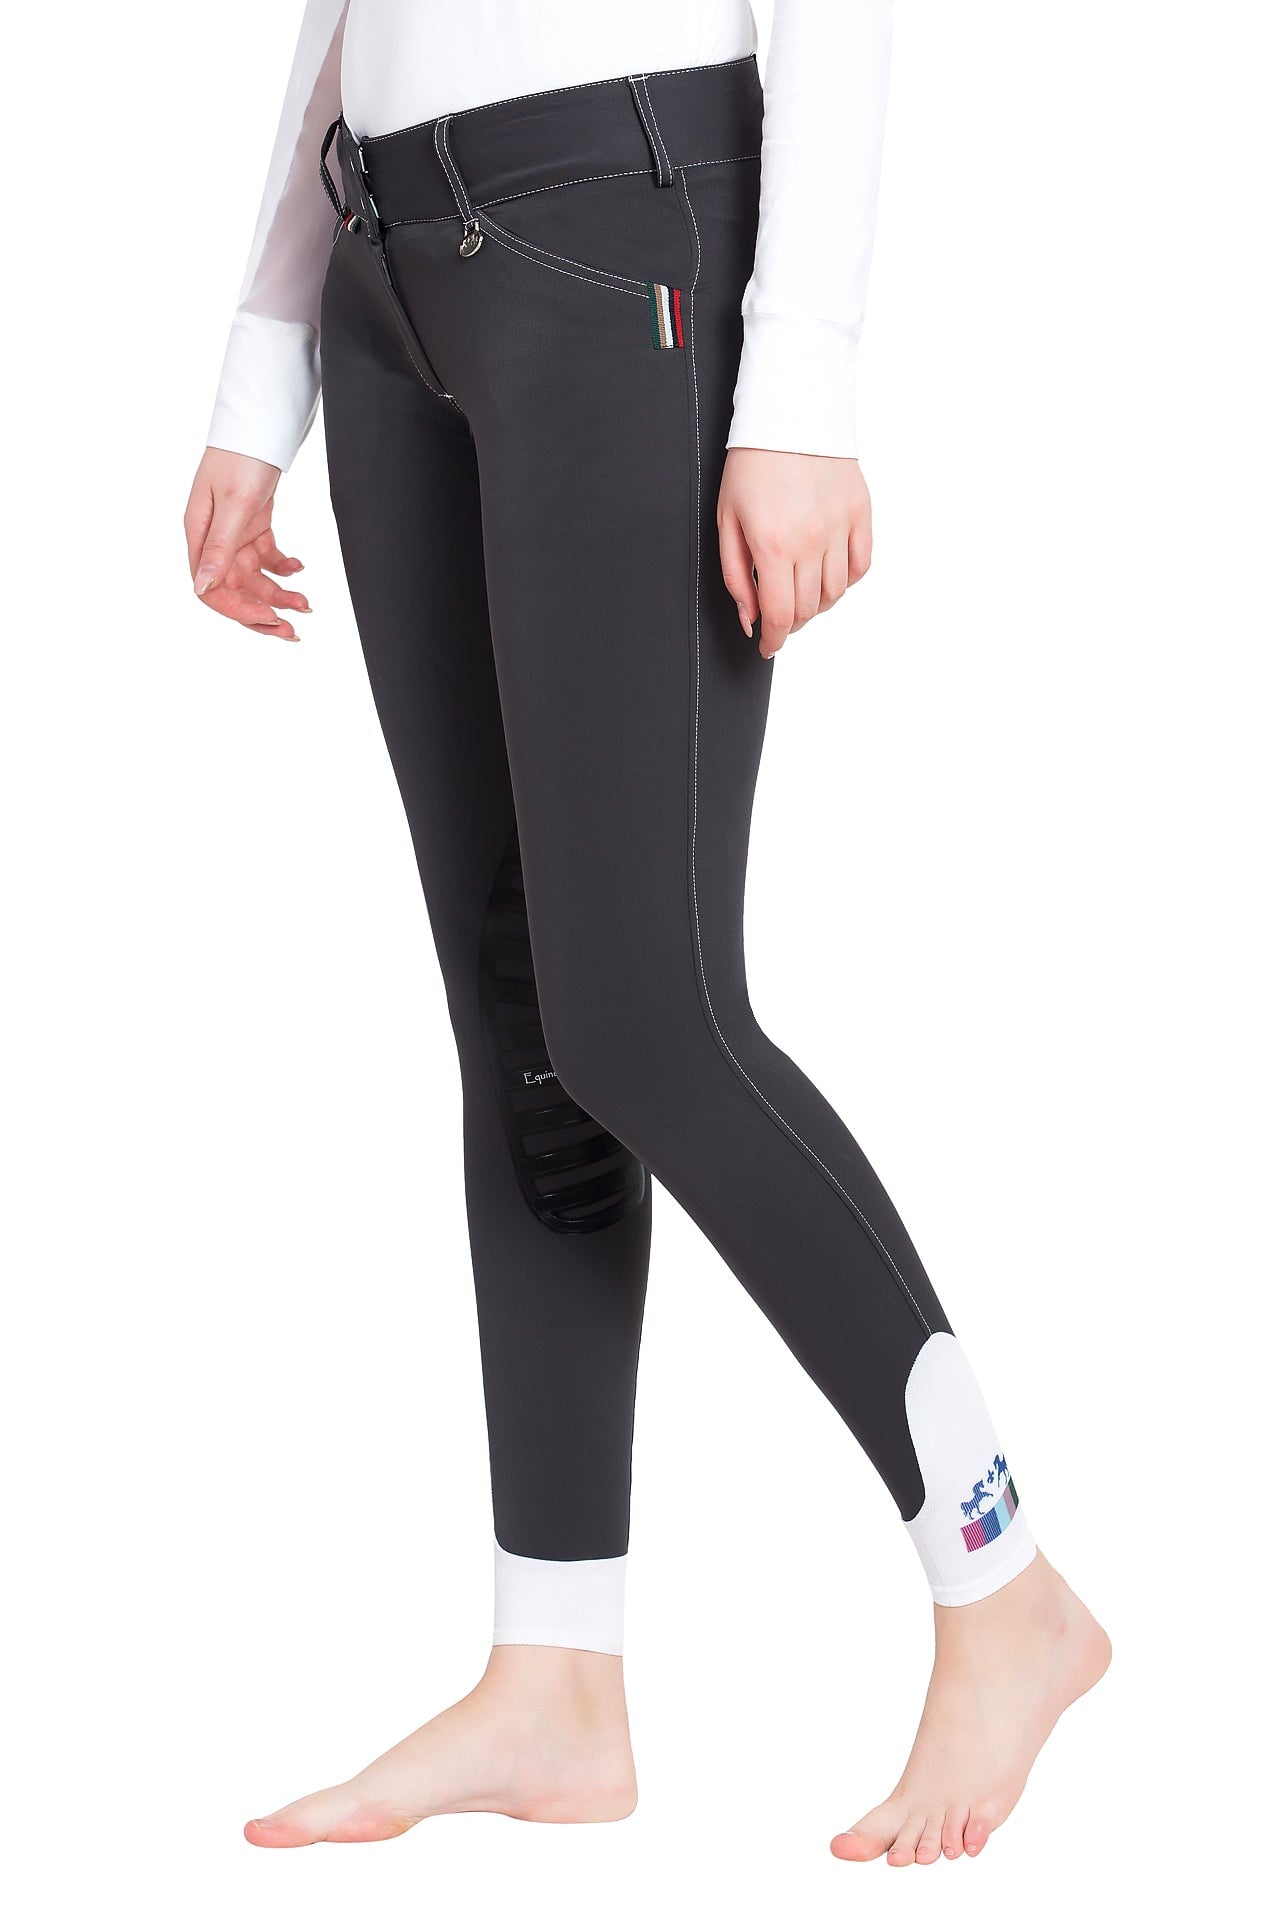 Equine Couture Ladies Brinley Silicone Knee Patch Breeches - Breeches.com